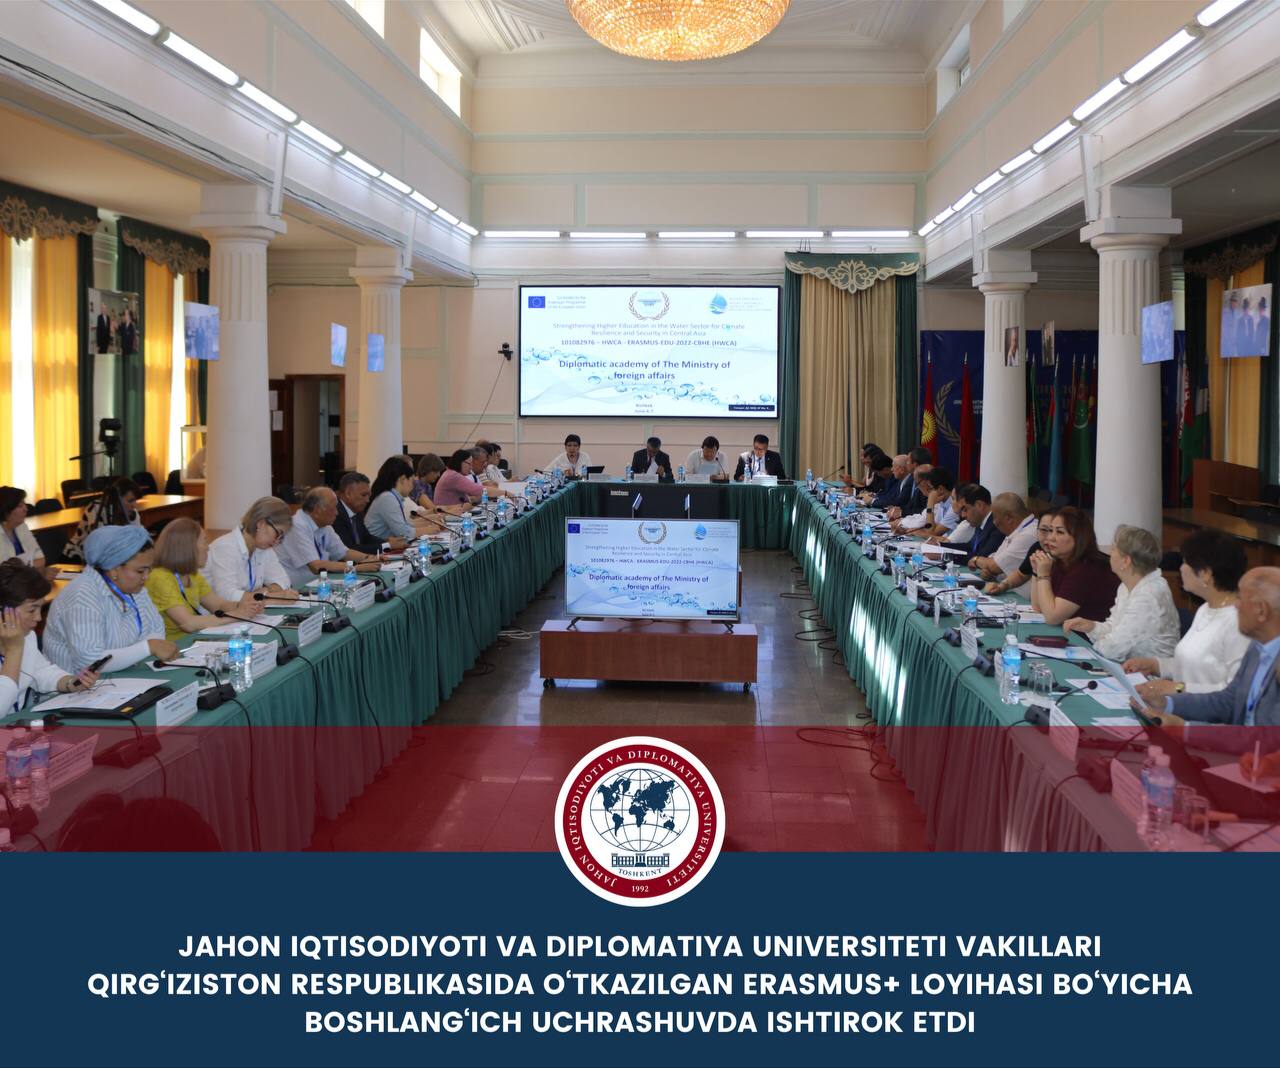 Representatives of the University of World Economy and Diplomacy participated in the initial meeting of the Erasmus+ project held in the Kyrgyz Republic